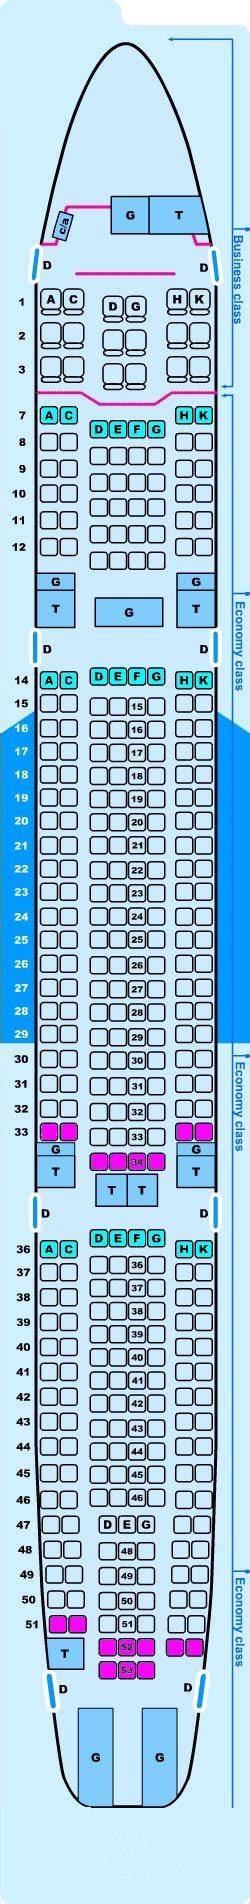 For your next Hong Kong Airlines flight, use this seating chart 